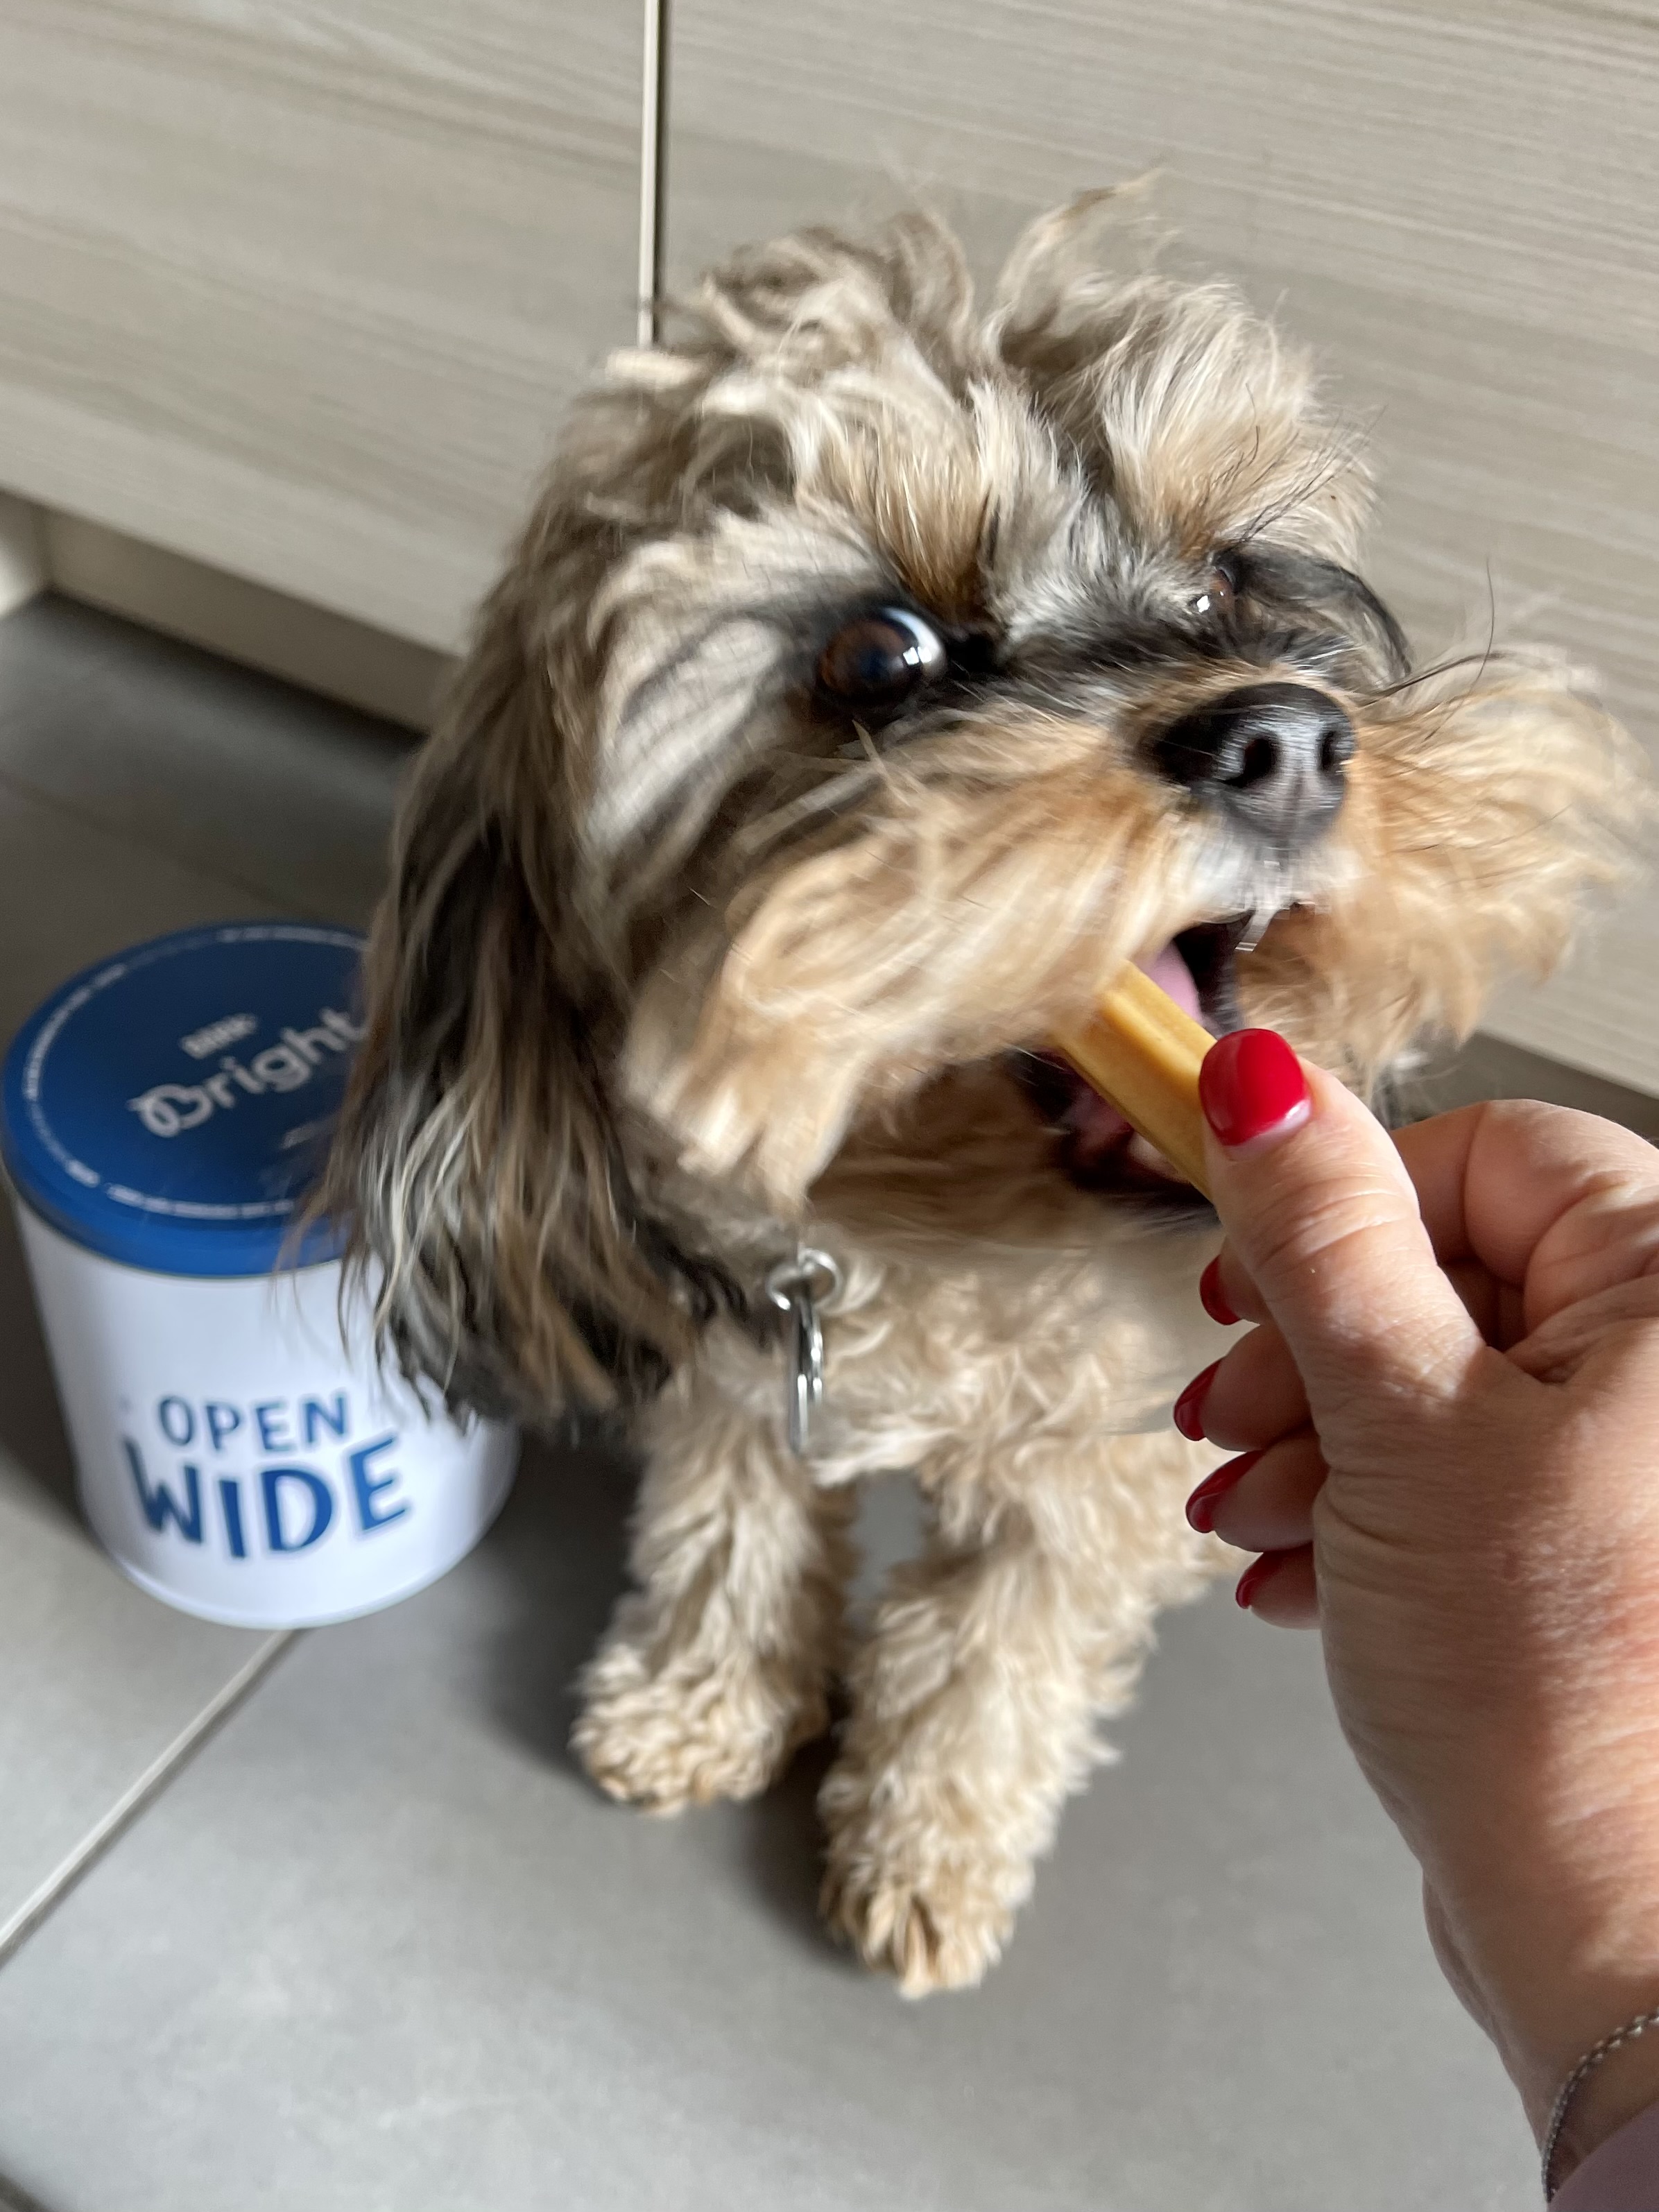 Unbiased review of Bark Bright, the daily dual toothpaste and dental stick system to keep dogs’ funky breath and plaque buildup under control | www.grownupdish.com